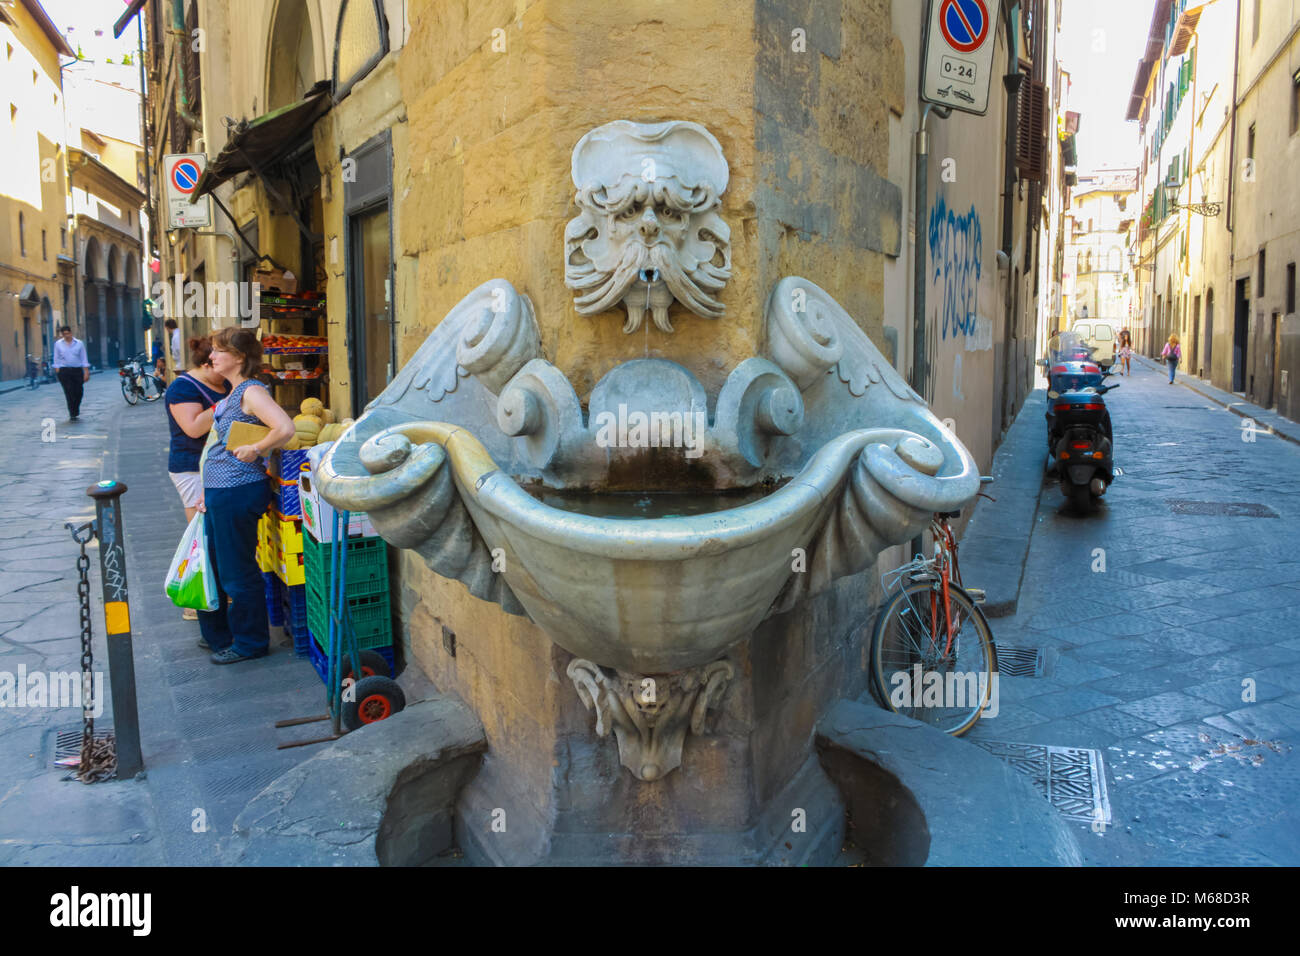 Florence, Italy - May 23, 2011: Fontana dello Sprone, one of the most famous fountains in Florence. Built in 1608 by Bernardo Buontalenti, and located Stock Photo